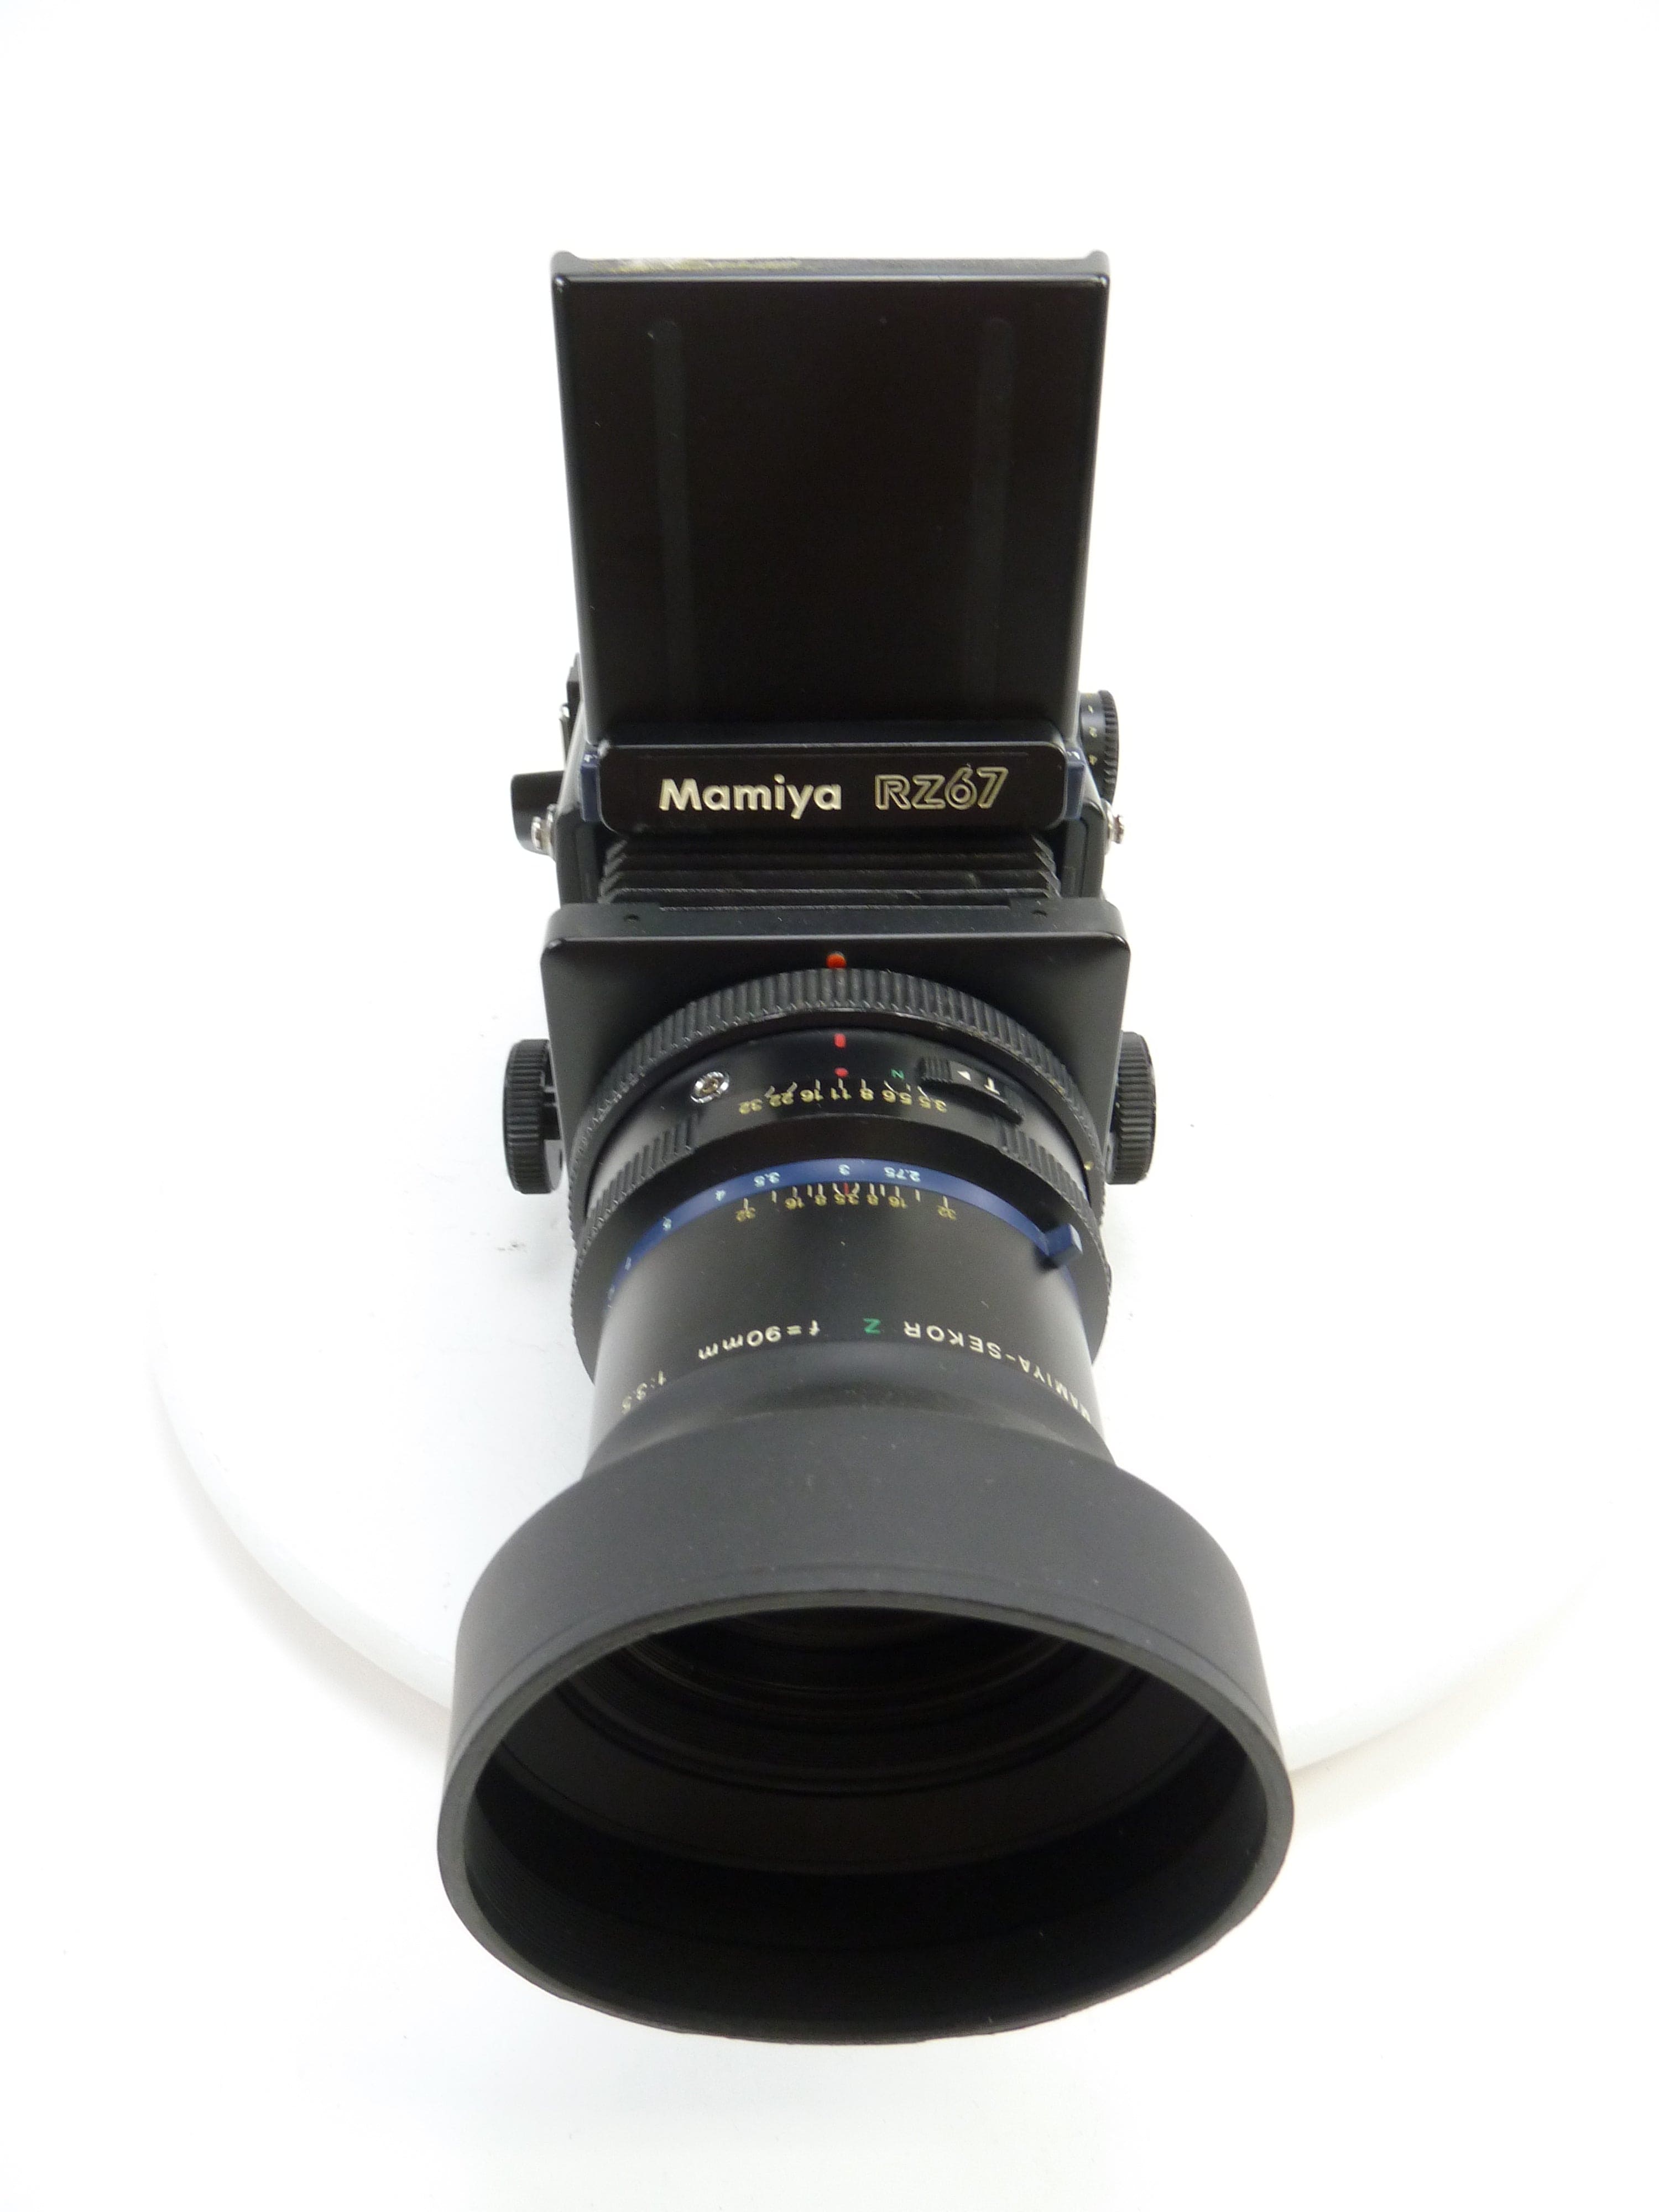 Mamiya RZ67 Camera Outfit with 90MM F3.5 Lens, Pro 120 Back, and WLF